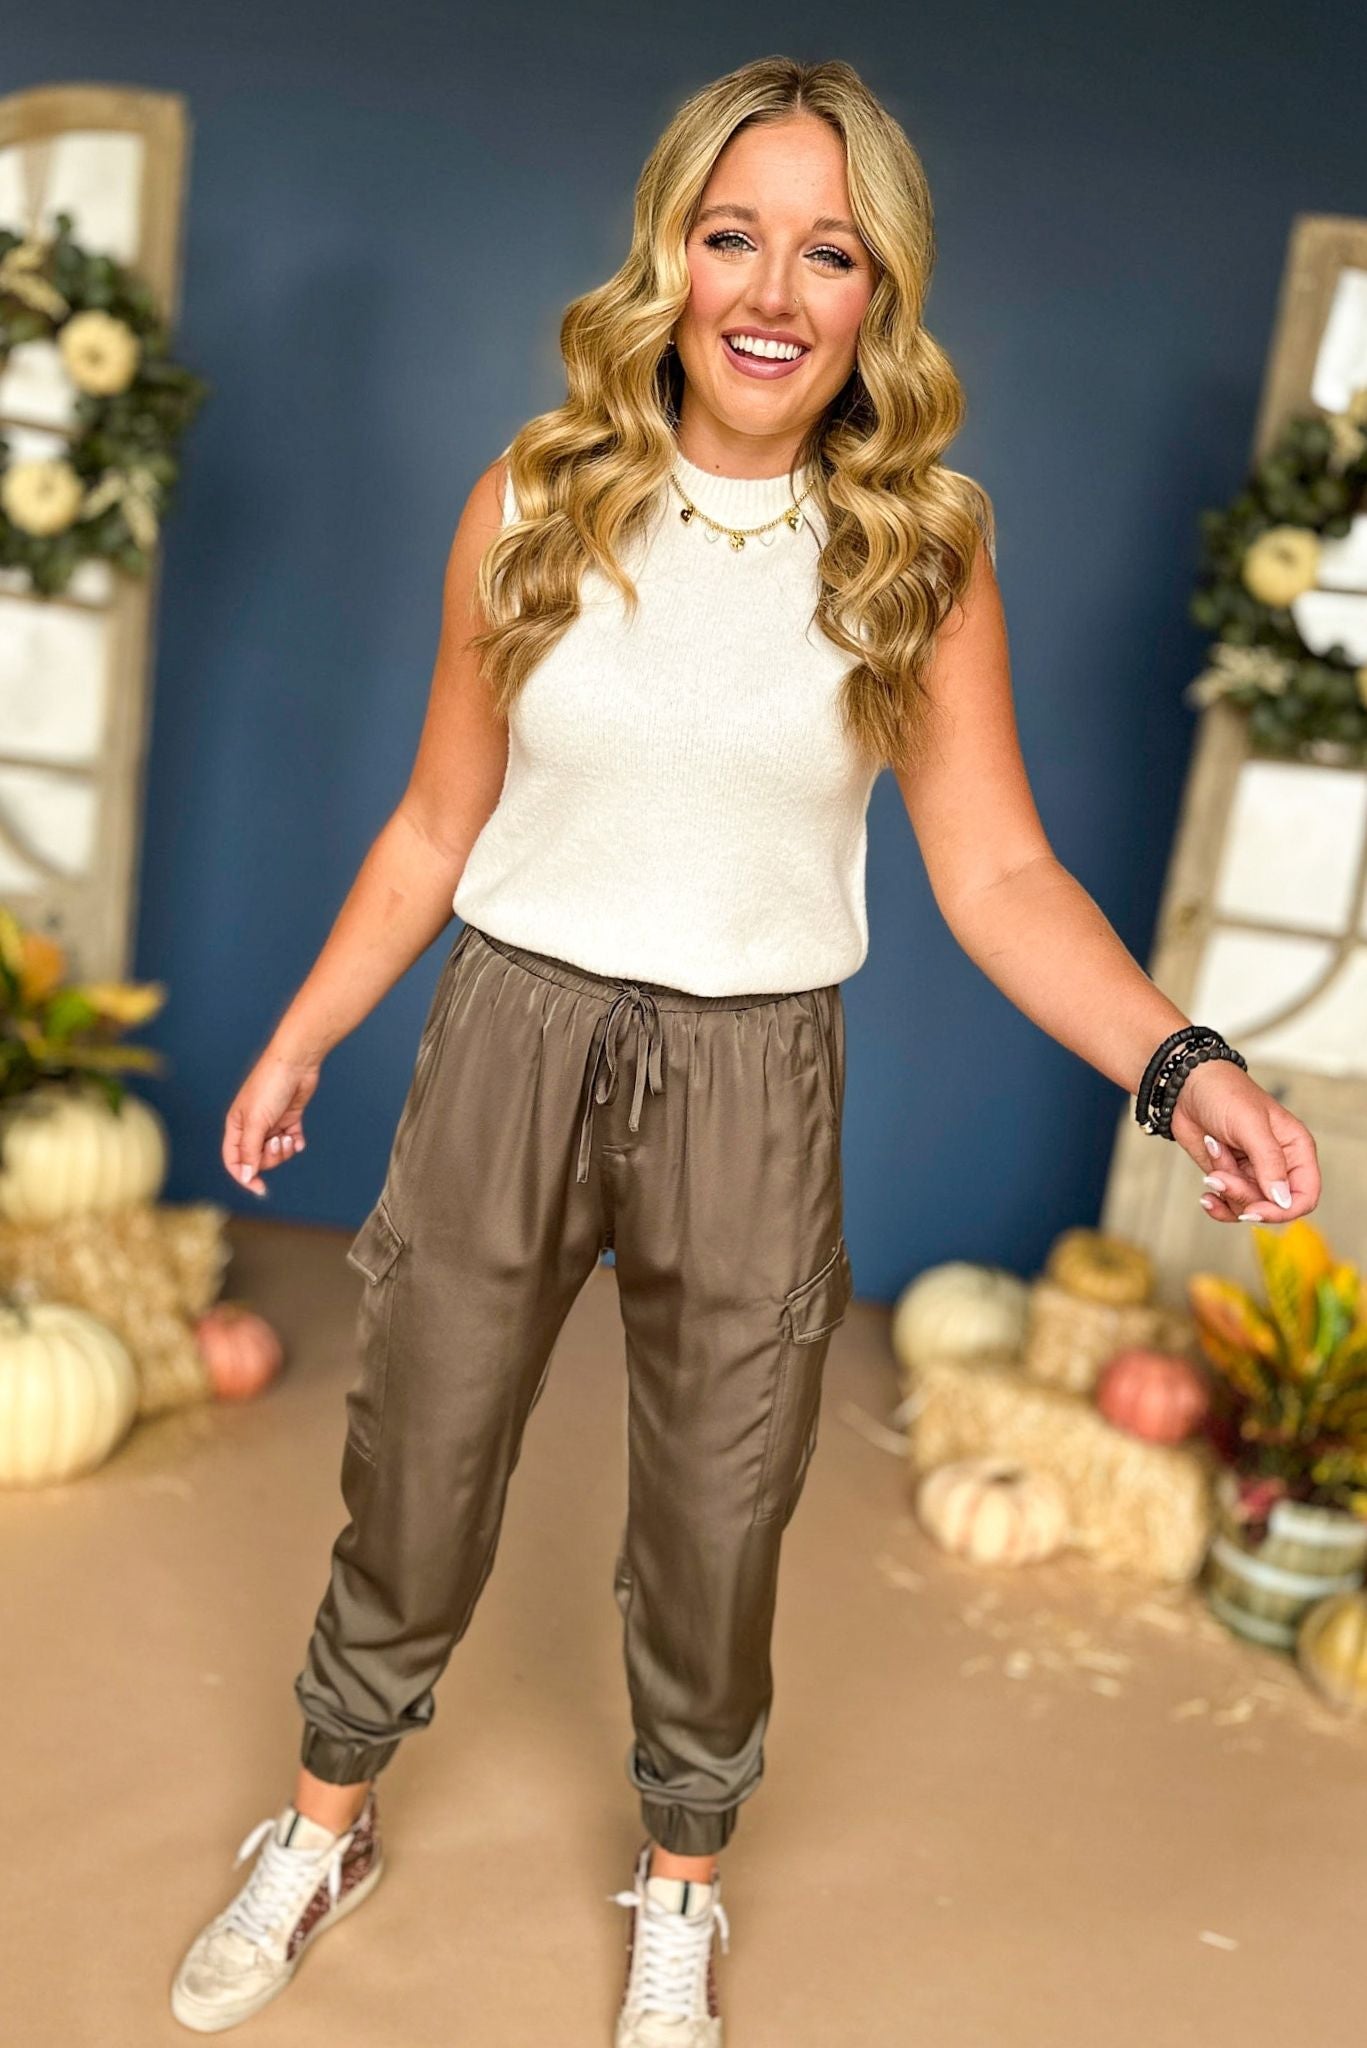 Green Satin Jogger Pants, must have pants, must have style, street style, fall style, fall fashion, fall pants, elevated style, elevated pants, mom style, shop style your senses by mallory fitzsimmons